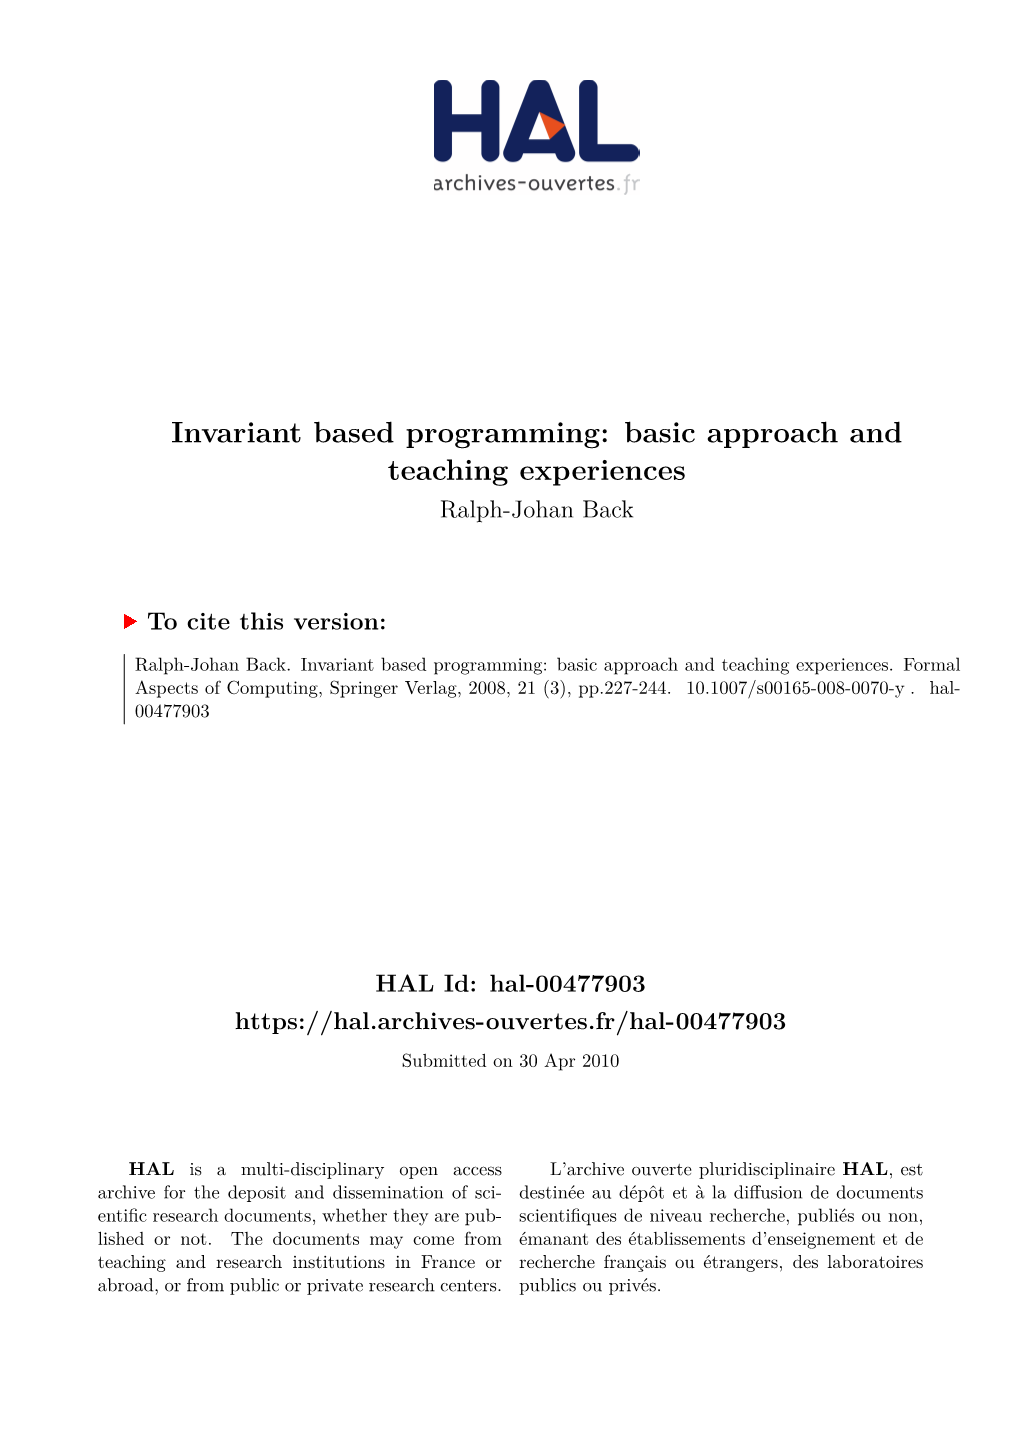 Invariant Based Programming: Basic Approach and Teaching Experiences Ralph-Johan Back